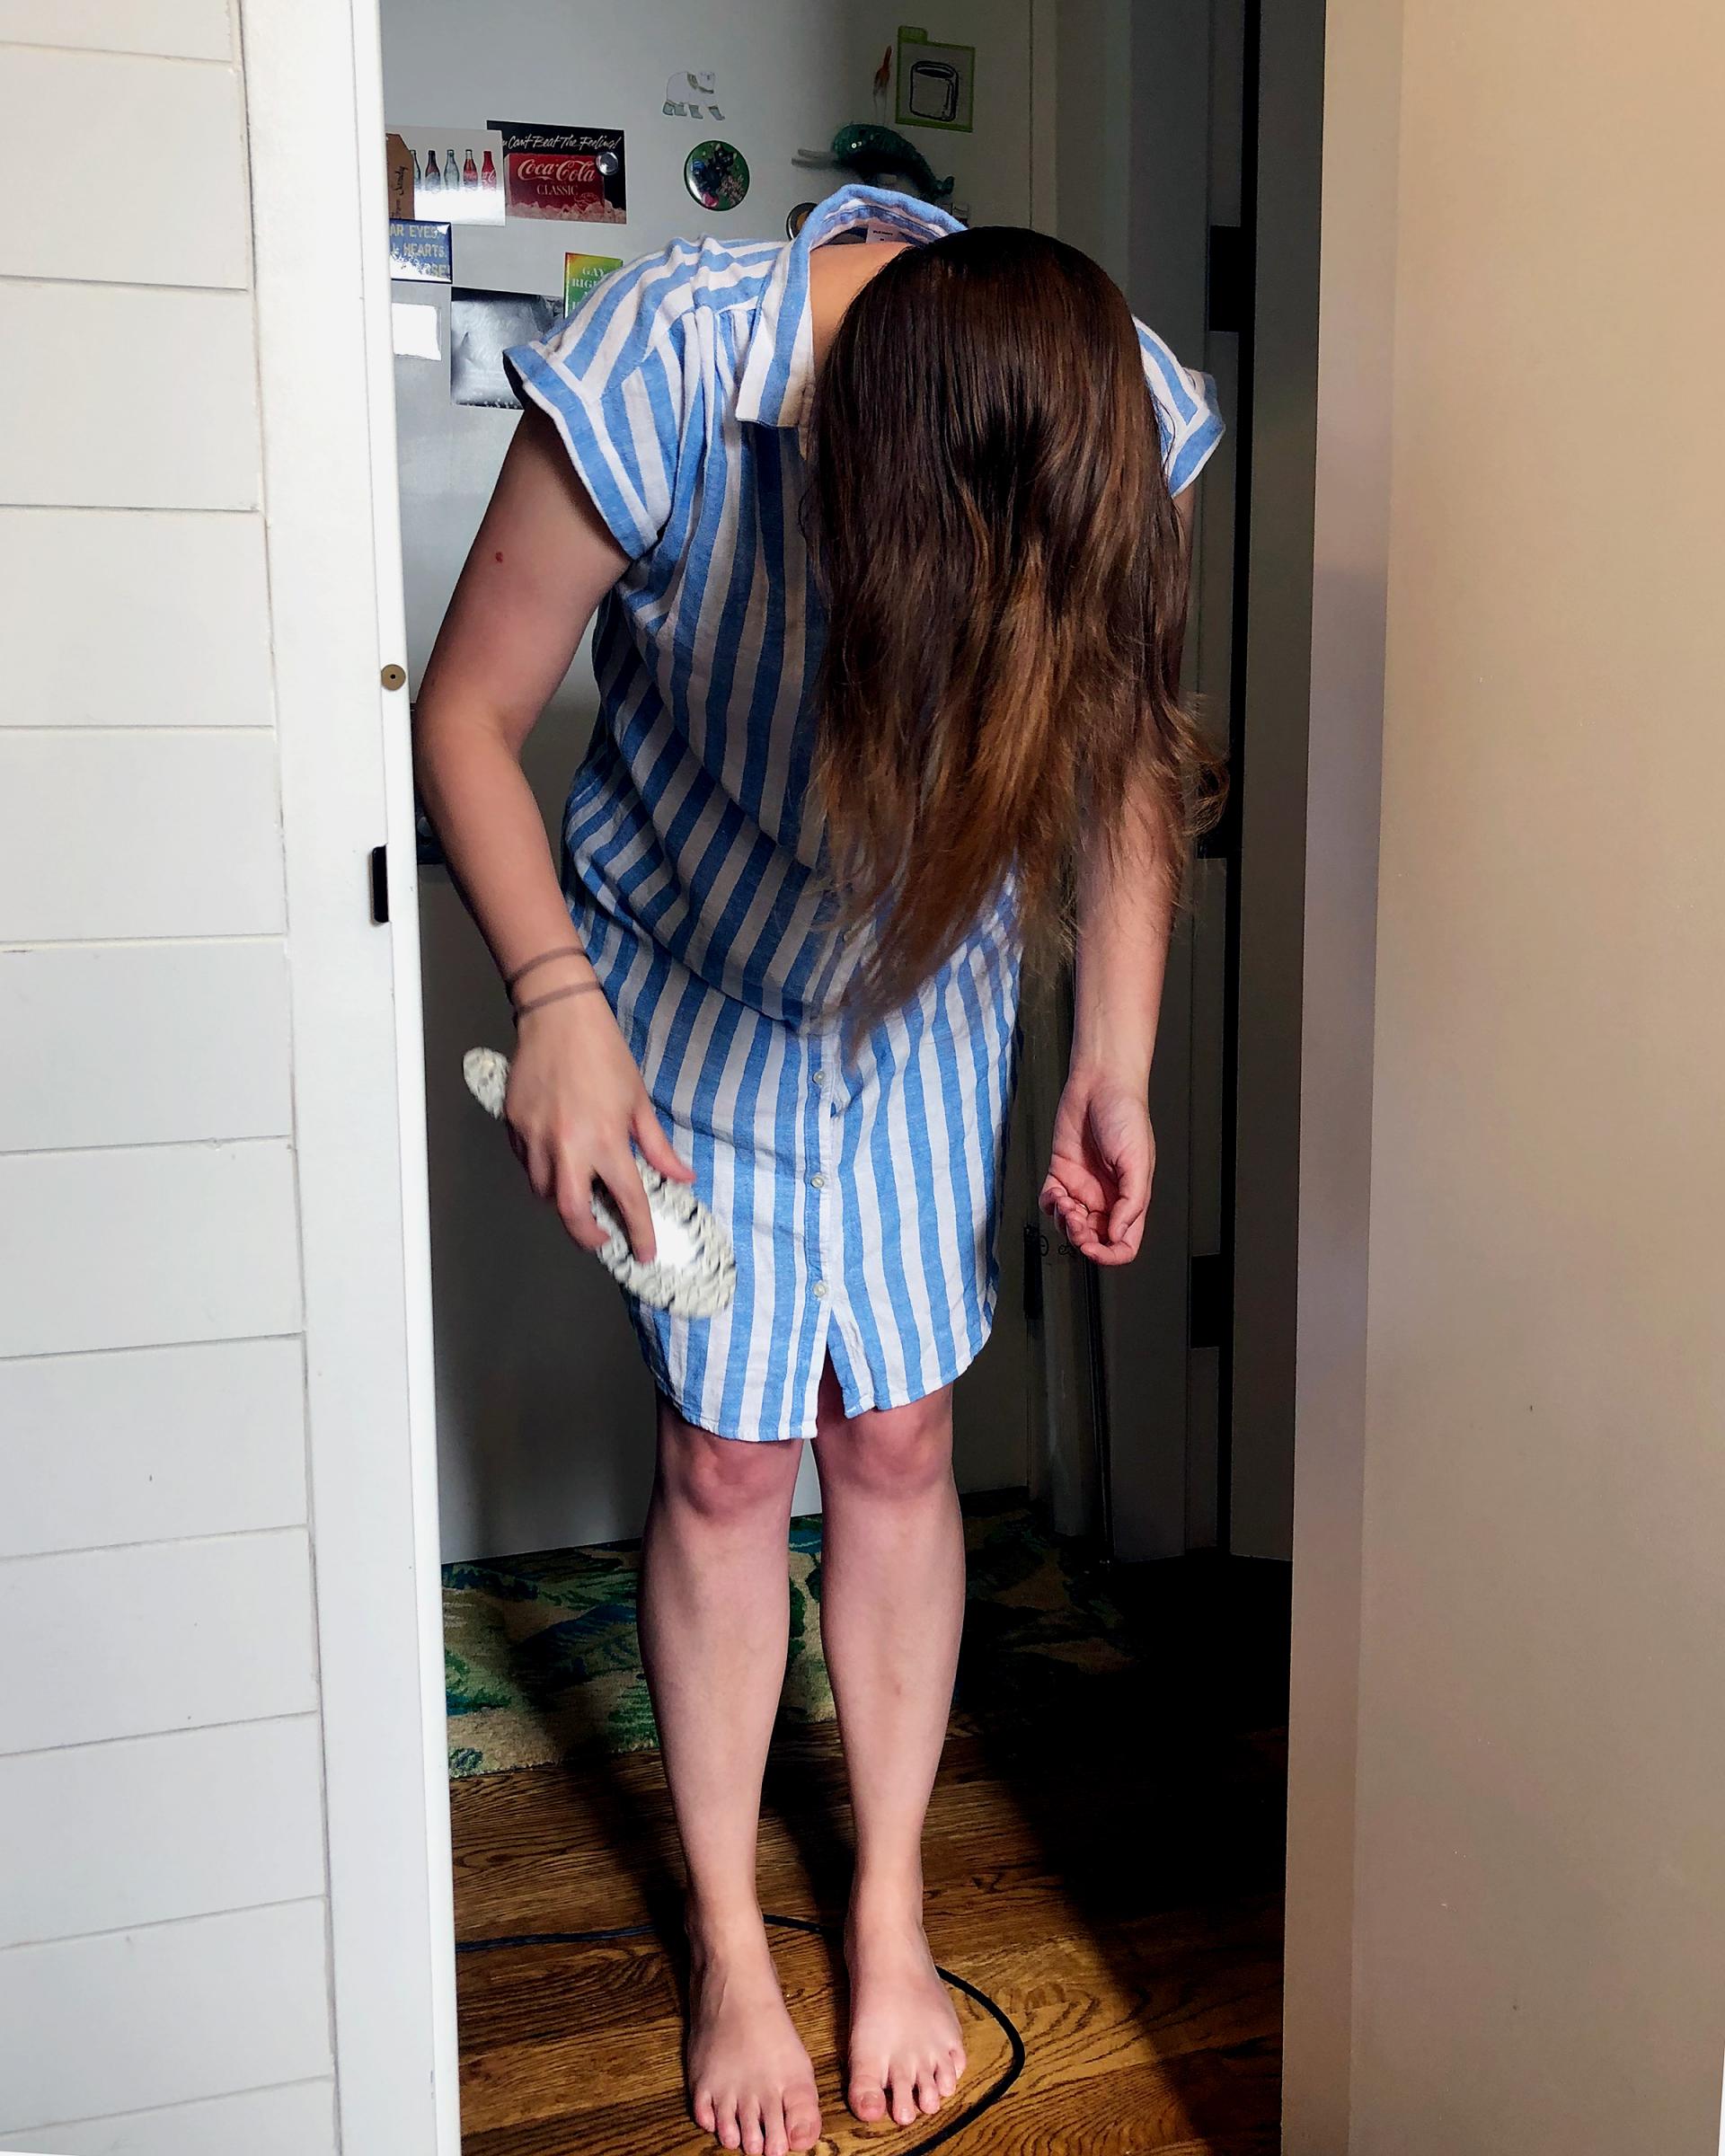 A photograph of a white feminine person in a doorframe. They are barefoot, wearing a blue and white striped shirt-dress and holding a hairbrush, having just pulled it through their long brown hair. 